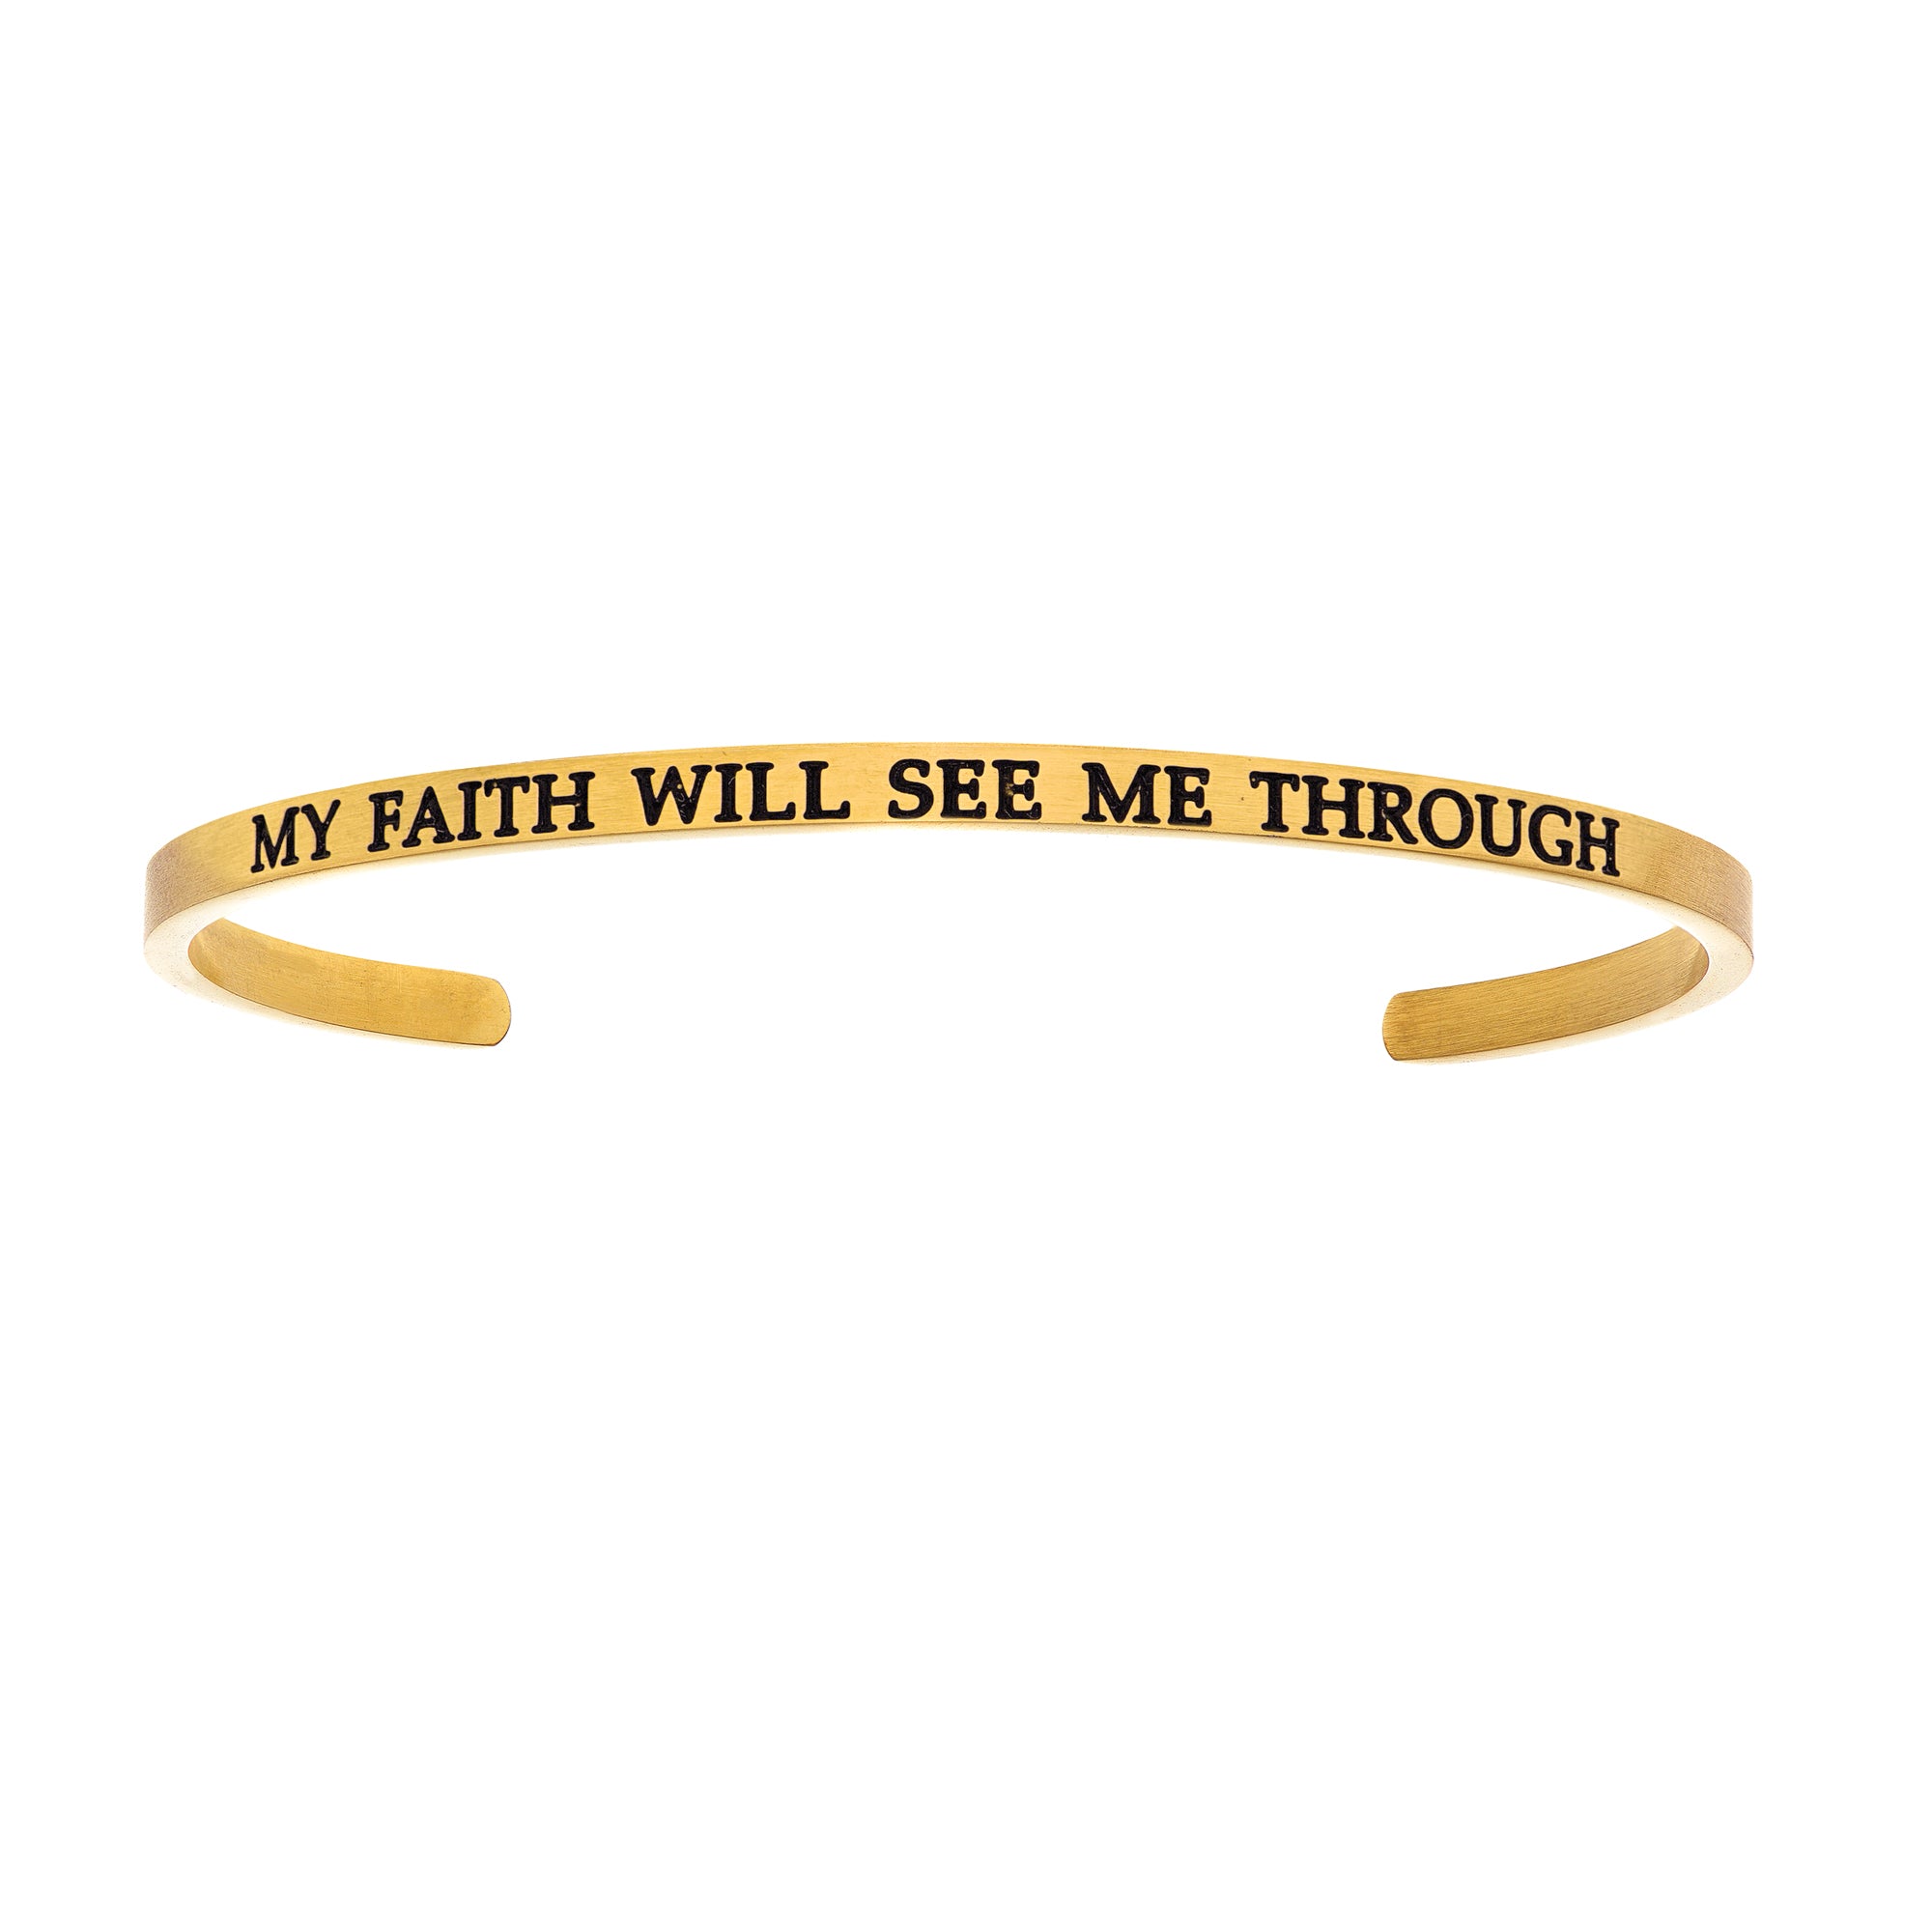 Intuitions Stainless Steel MY FAITH WILL SEE ME THROUGH Diamond Accent Cuff Bangle Bracelet